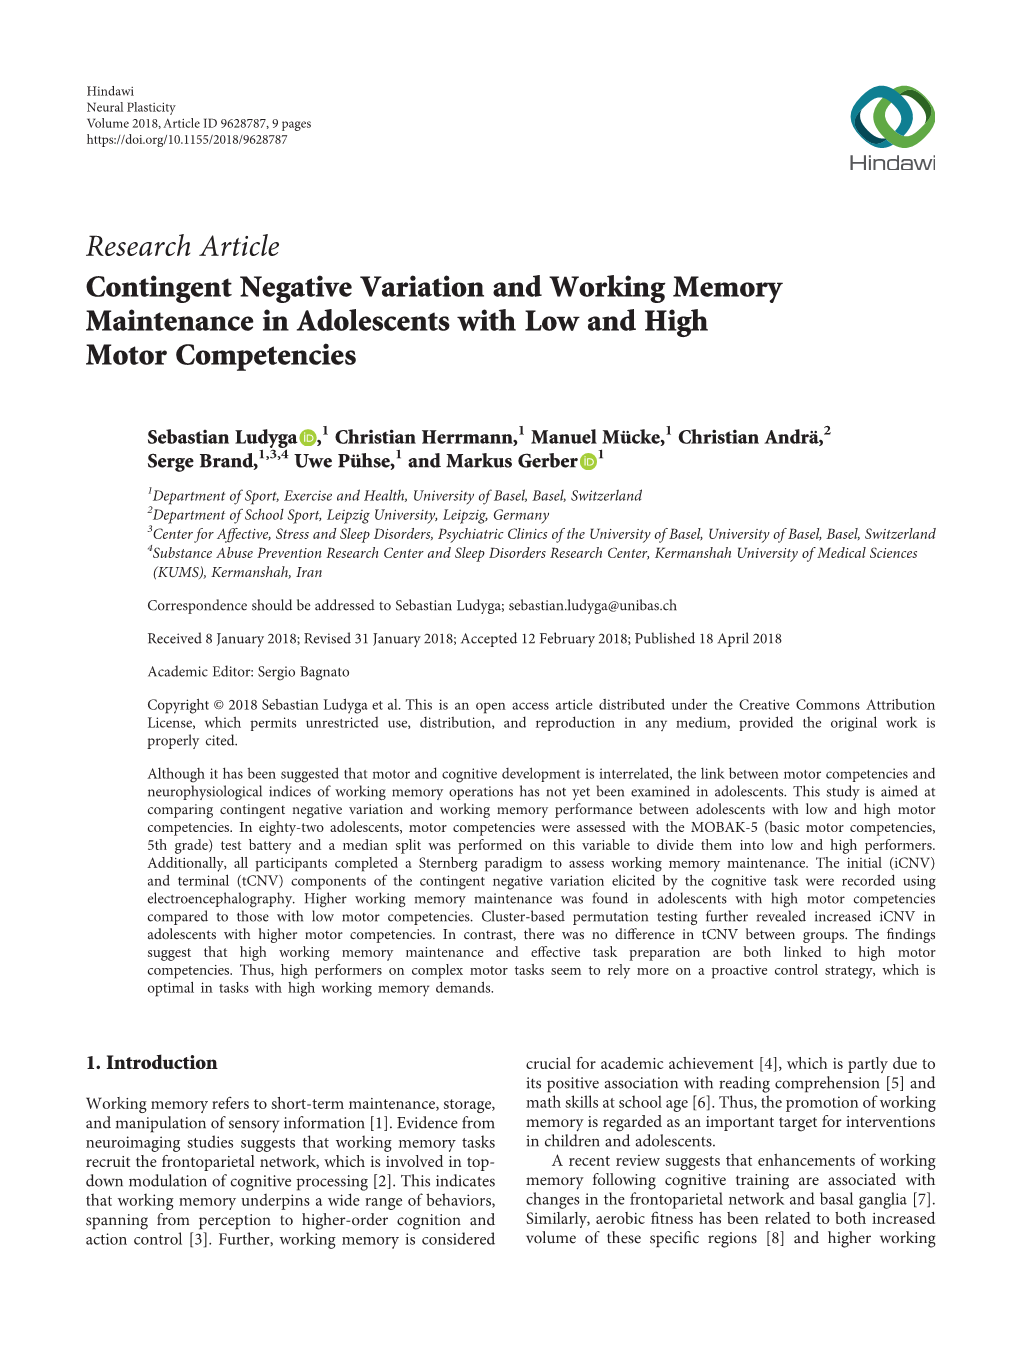 Research Article Contingent Negative Variation and Working Memory Maintenance in Adolescents with Low and High Motor Competencies